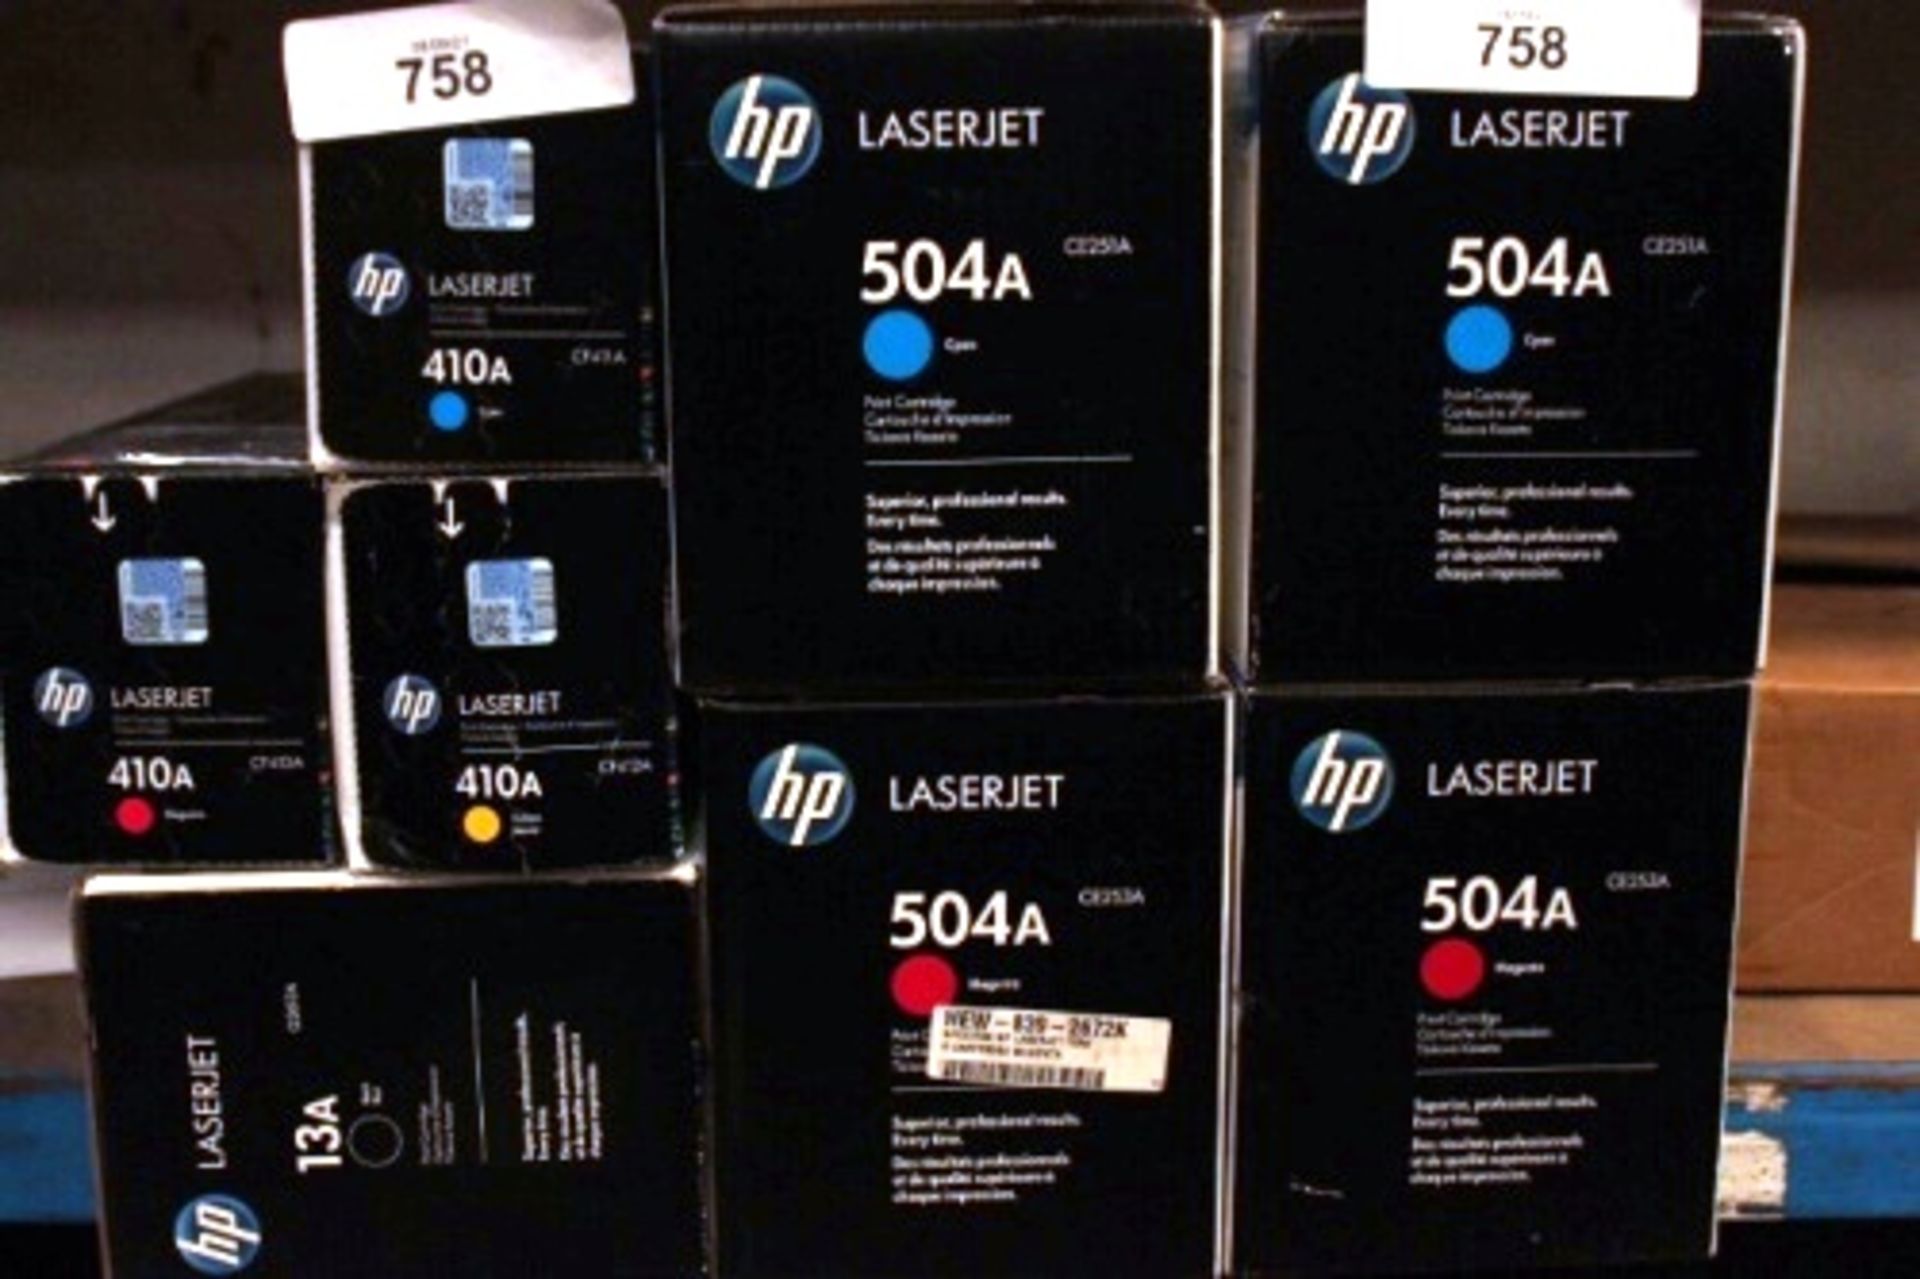 2 x cyan and 2 x magenta HP LaserJet 504A toner cartridges together with 1 x black HP13A toner